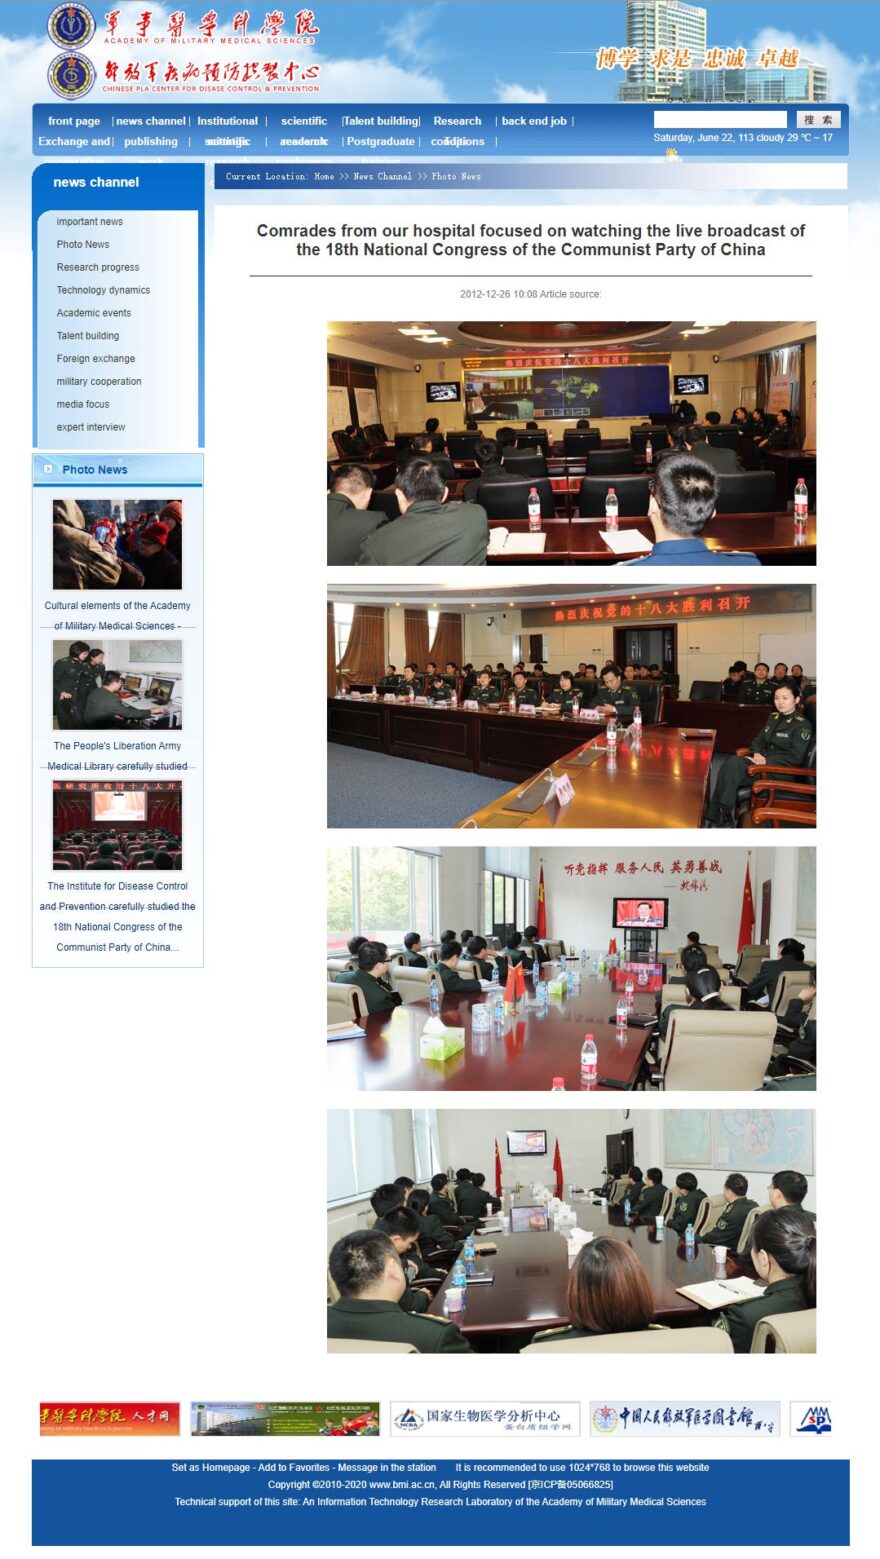 The archived website of the People’s Liberation Army’s Academy of Military Medical Sciences-2